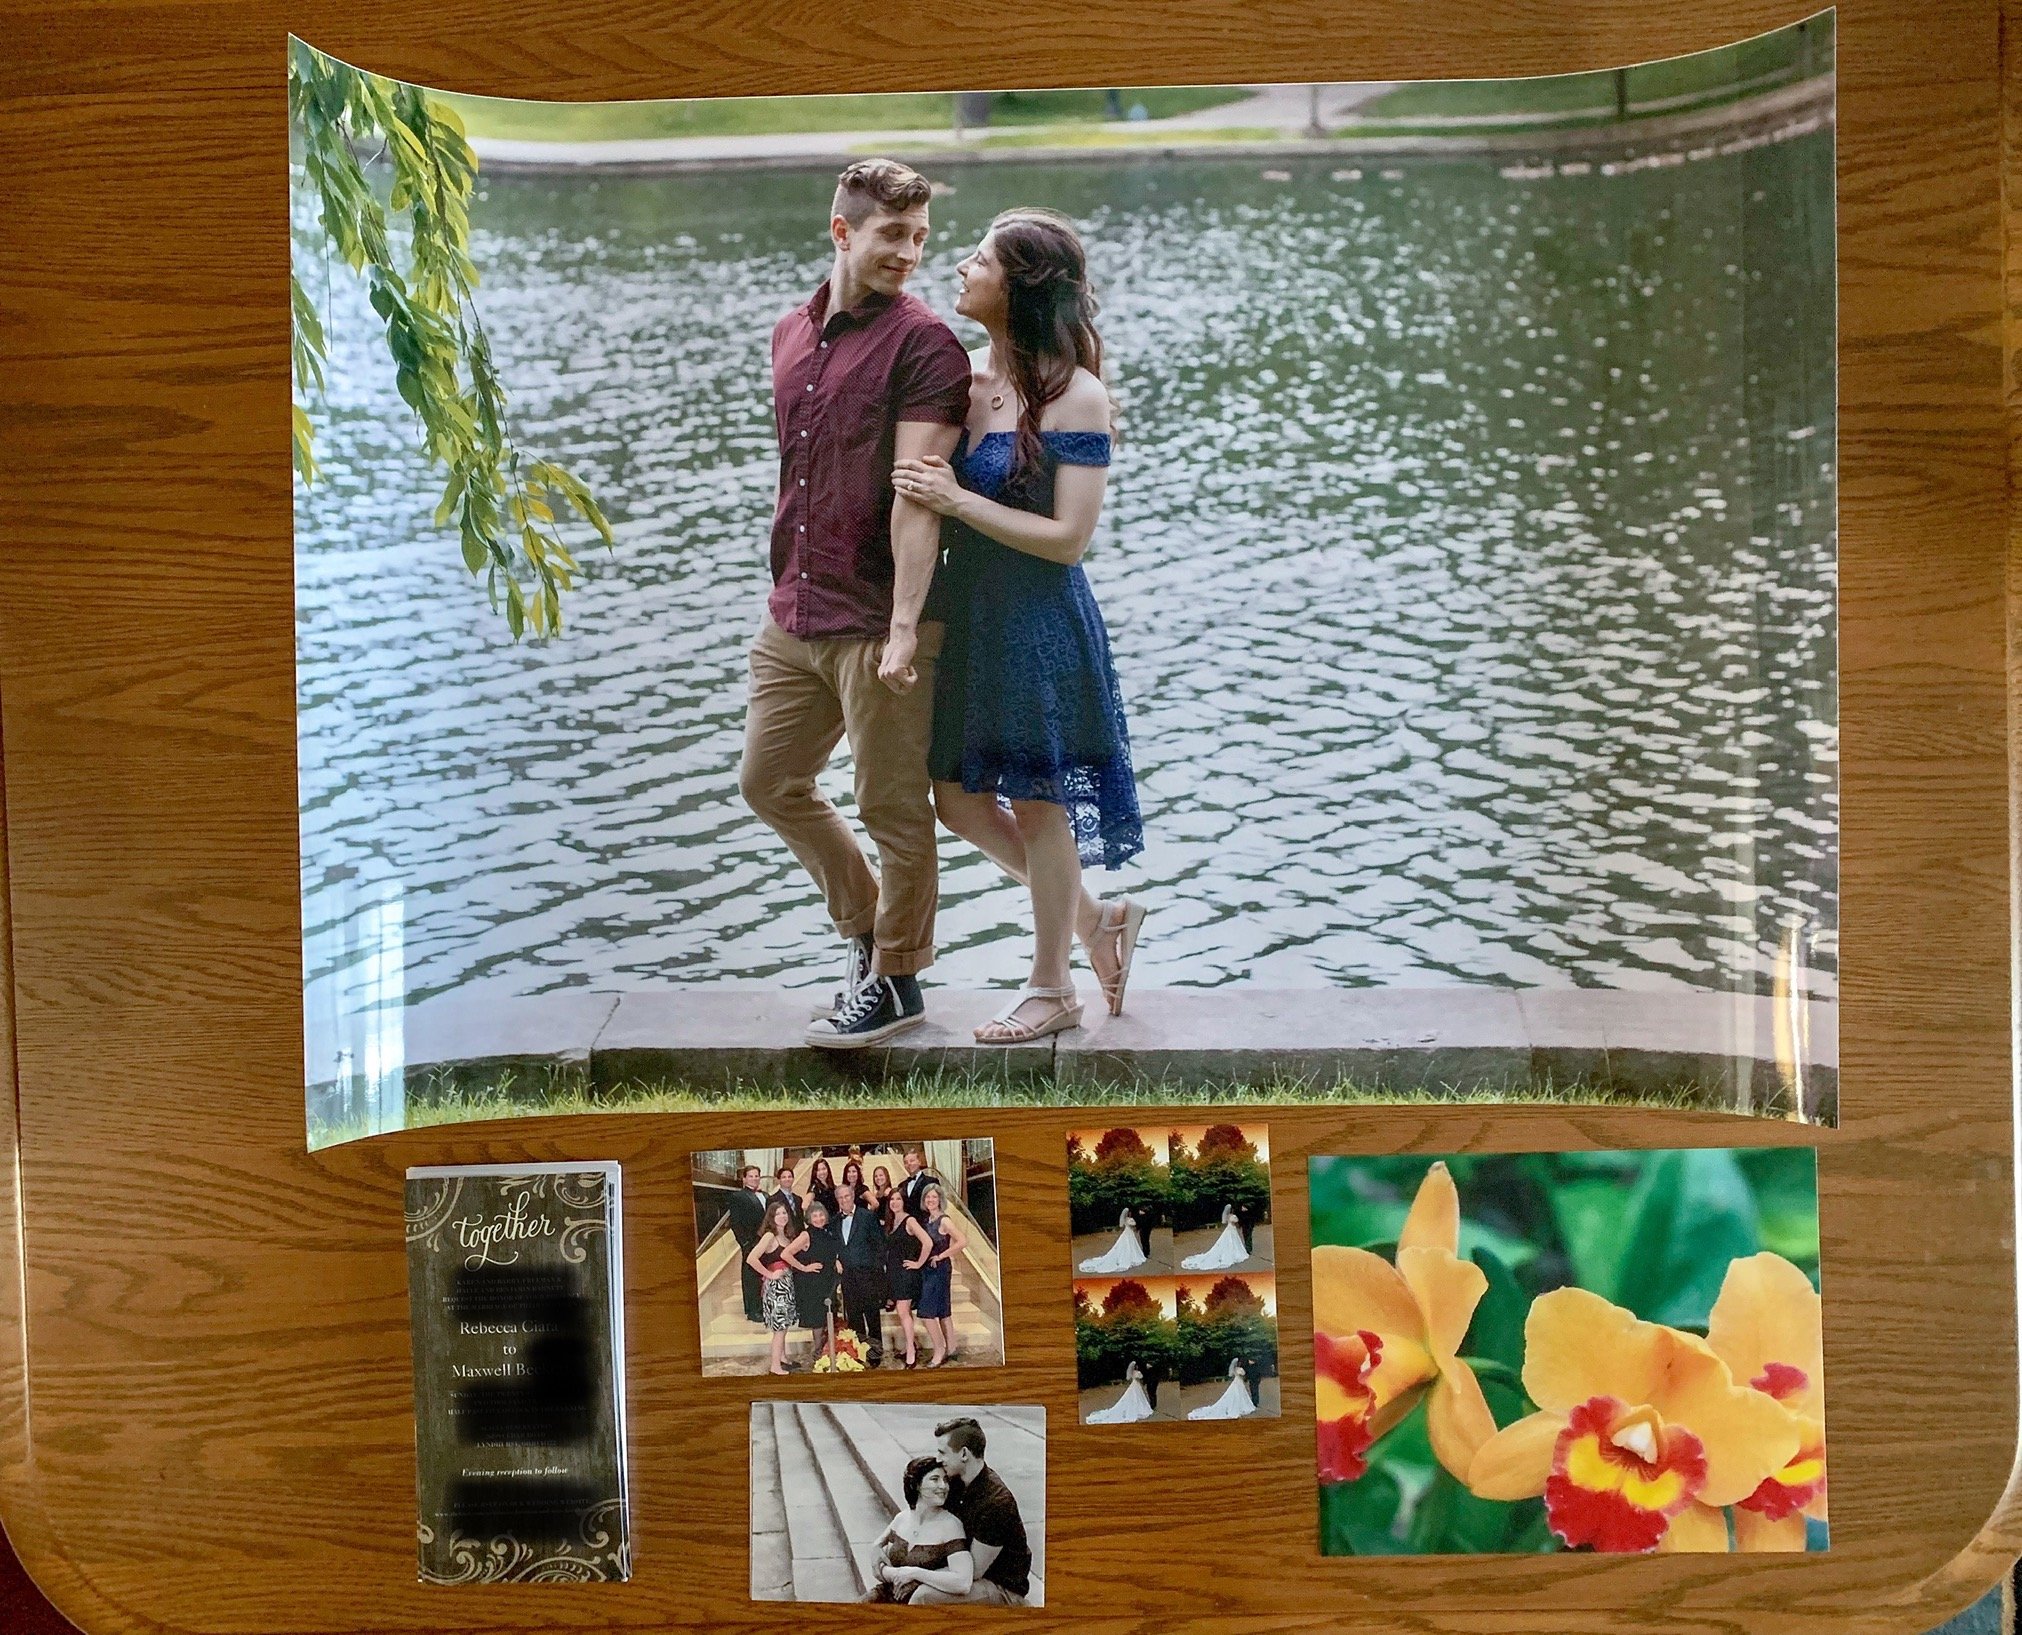 CVS Photo Printing review: Extensive photo services | iMore cvs photo locations